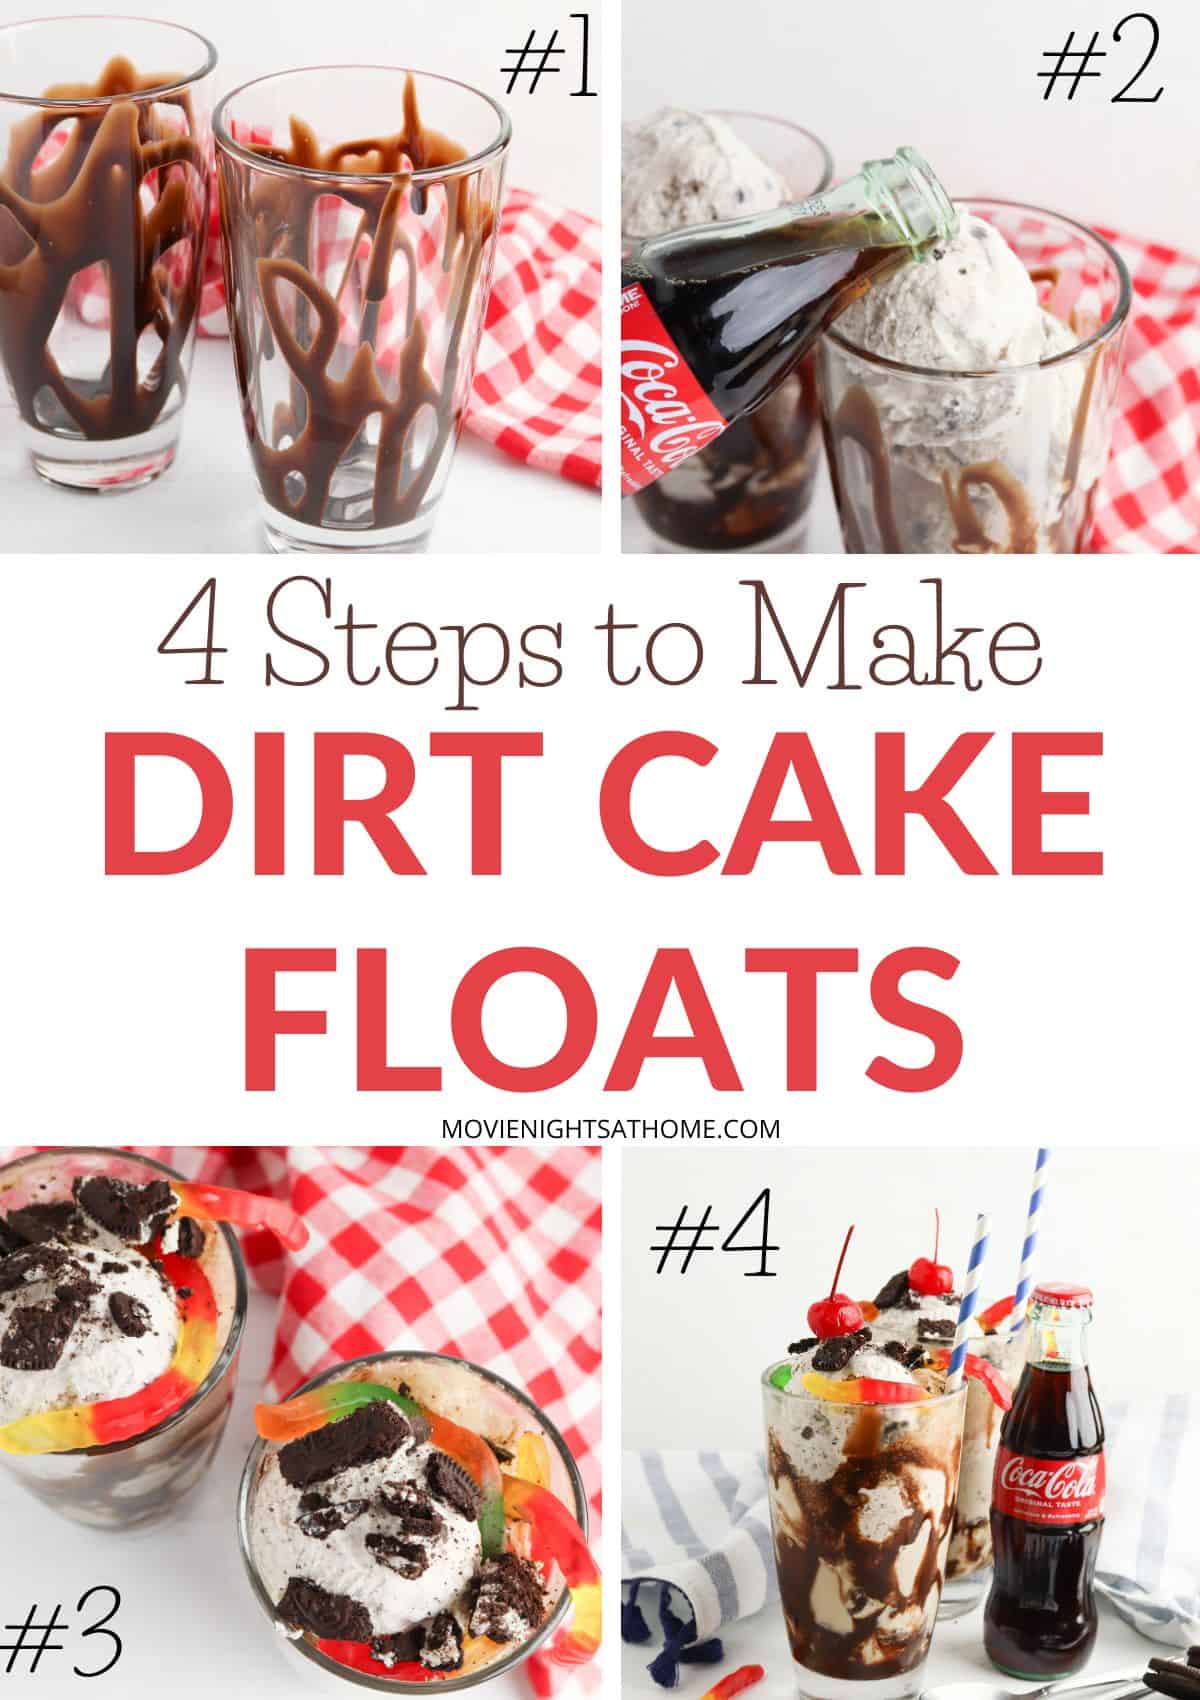 4 steps to make dirt cake floats - collage of the 4 steps